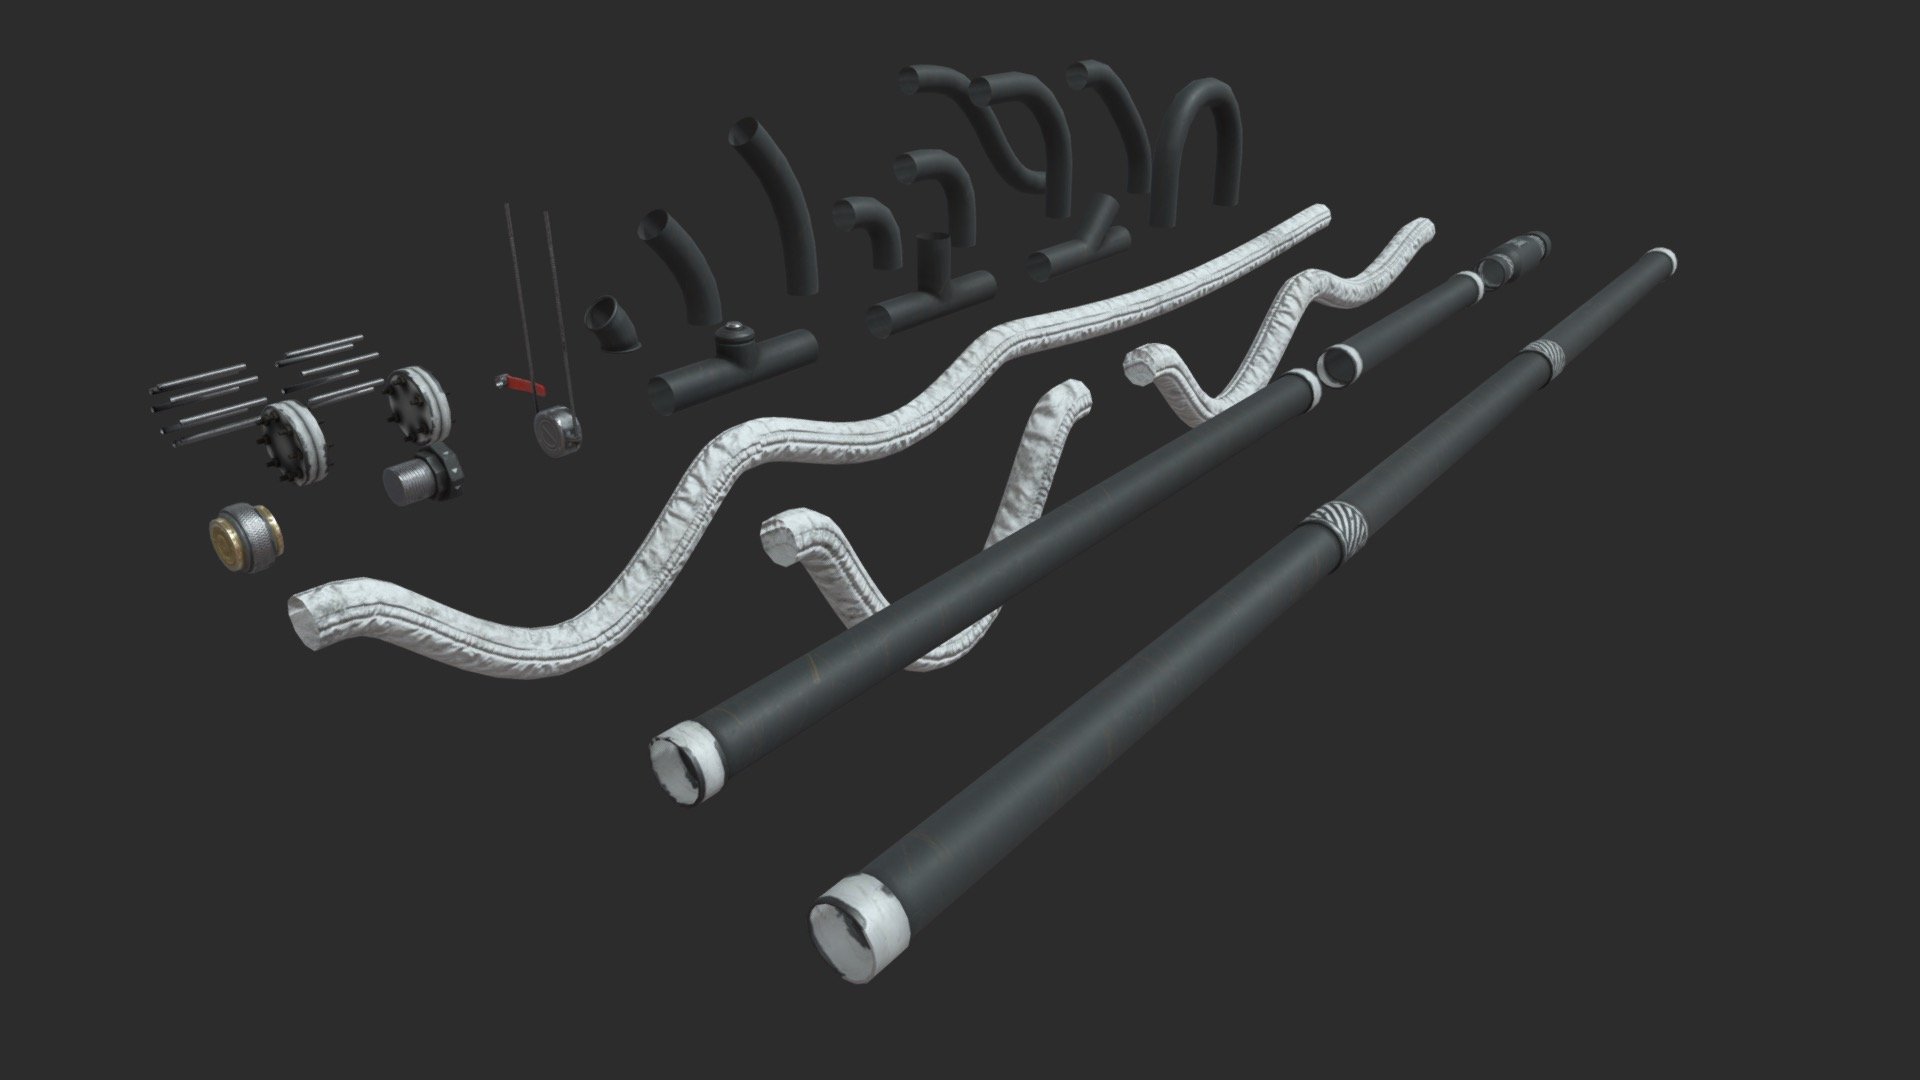 This modular pipes asset pack including 27 individual set Ø10 pipes with 4 LODs and colliders to get a good optimization. All elements can easily be positioned together by moving in 10cm increments. Also, this pack includes 37 pre-assembled sets to allow you to speed up your assemblies. 



INDIVIDUAL SETS INCLUDE :


4 elbow 90°
3 elbow 45°
1 U pipe
1 S pipe
2 T pipes
1 Y pipe
4 straight pipes
3 flexible pipes
2 screw joints
1 mounting bracket
1 handle valve
2 end of pipes
2 threaded rod sets

SPECIFICATIONS


Objects : 64
Polygons : 4975

GAME SPECS


LODs : Yes (inside FBX for Unity &amp; Unreal)
Numbers of LODs : 4
Collider : Yes
Lightmap UV : No

EXPORTED FORMATS


FBX
Collada
OBJ

TEXTURES


Materials in scene : 1
Textures sizes : 4K
Textures types : Base Color, Metallic, Roughness, Normal (DirectX &amp; OpenGL), Heigh &amp; AO (also Unity &amp; Unreal workflow maps)
Textures format : TGA &amp; PNG
 - Modular Pipes - Sci-Fi Black Paint - Buy Royalty Free 3D model by KangaroOz 3D (@KangaroOz-3D) 3d model